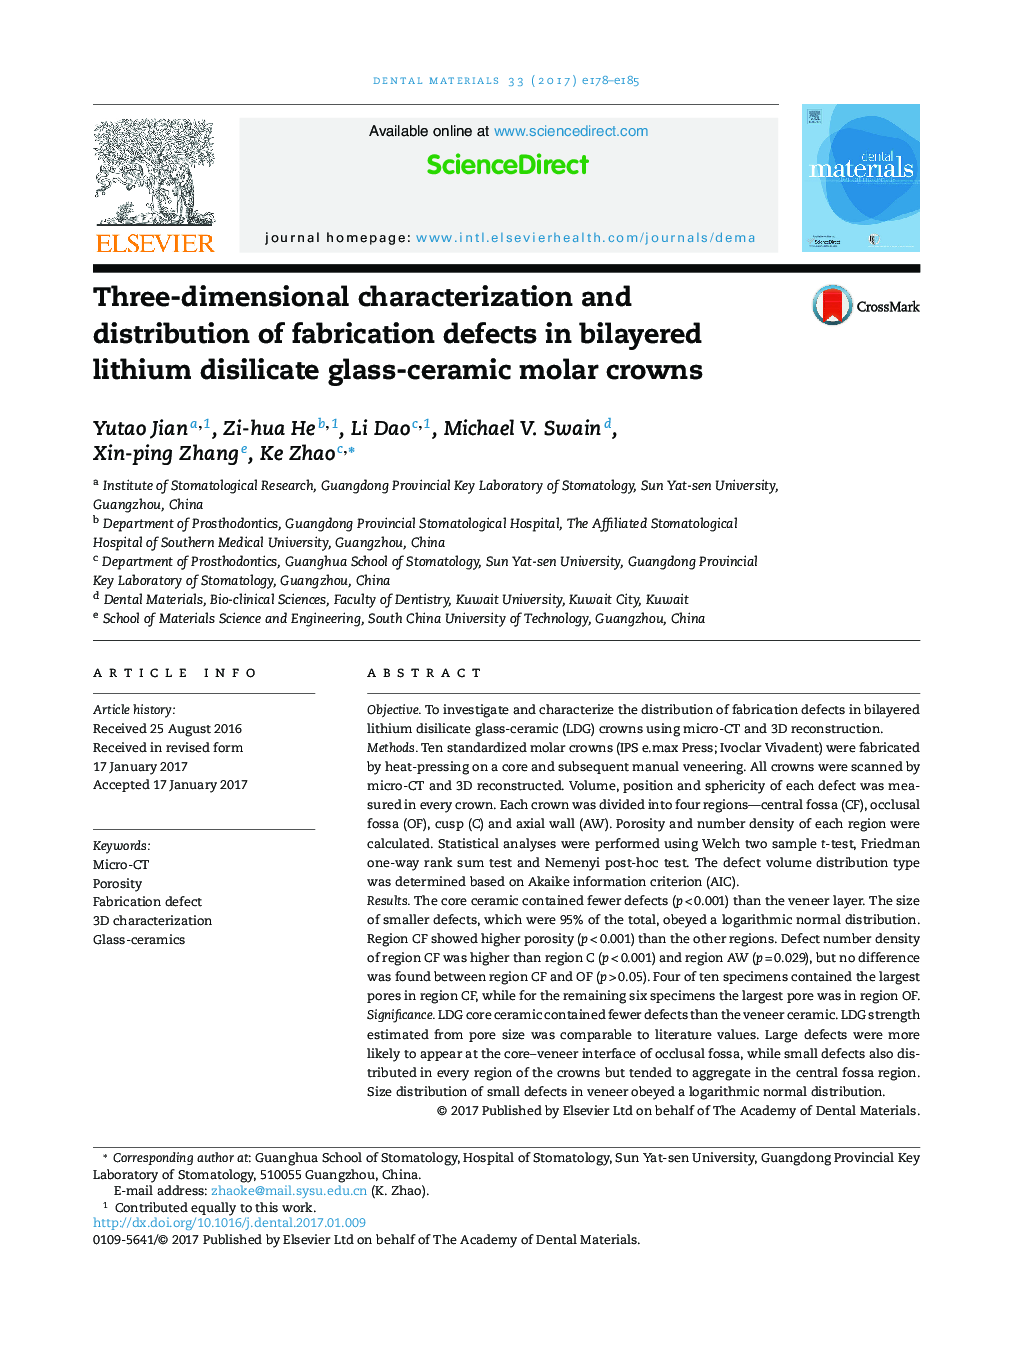 Three-dimensional characterization and distribution of fabrication defects in bilayered lithium disilicate glass-ceramic molar crowns